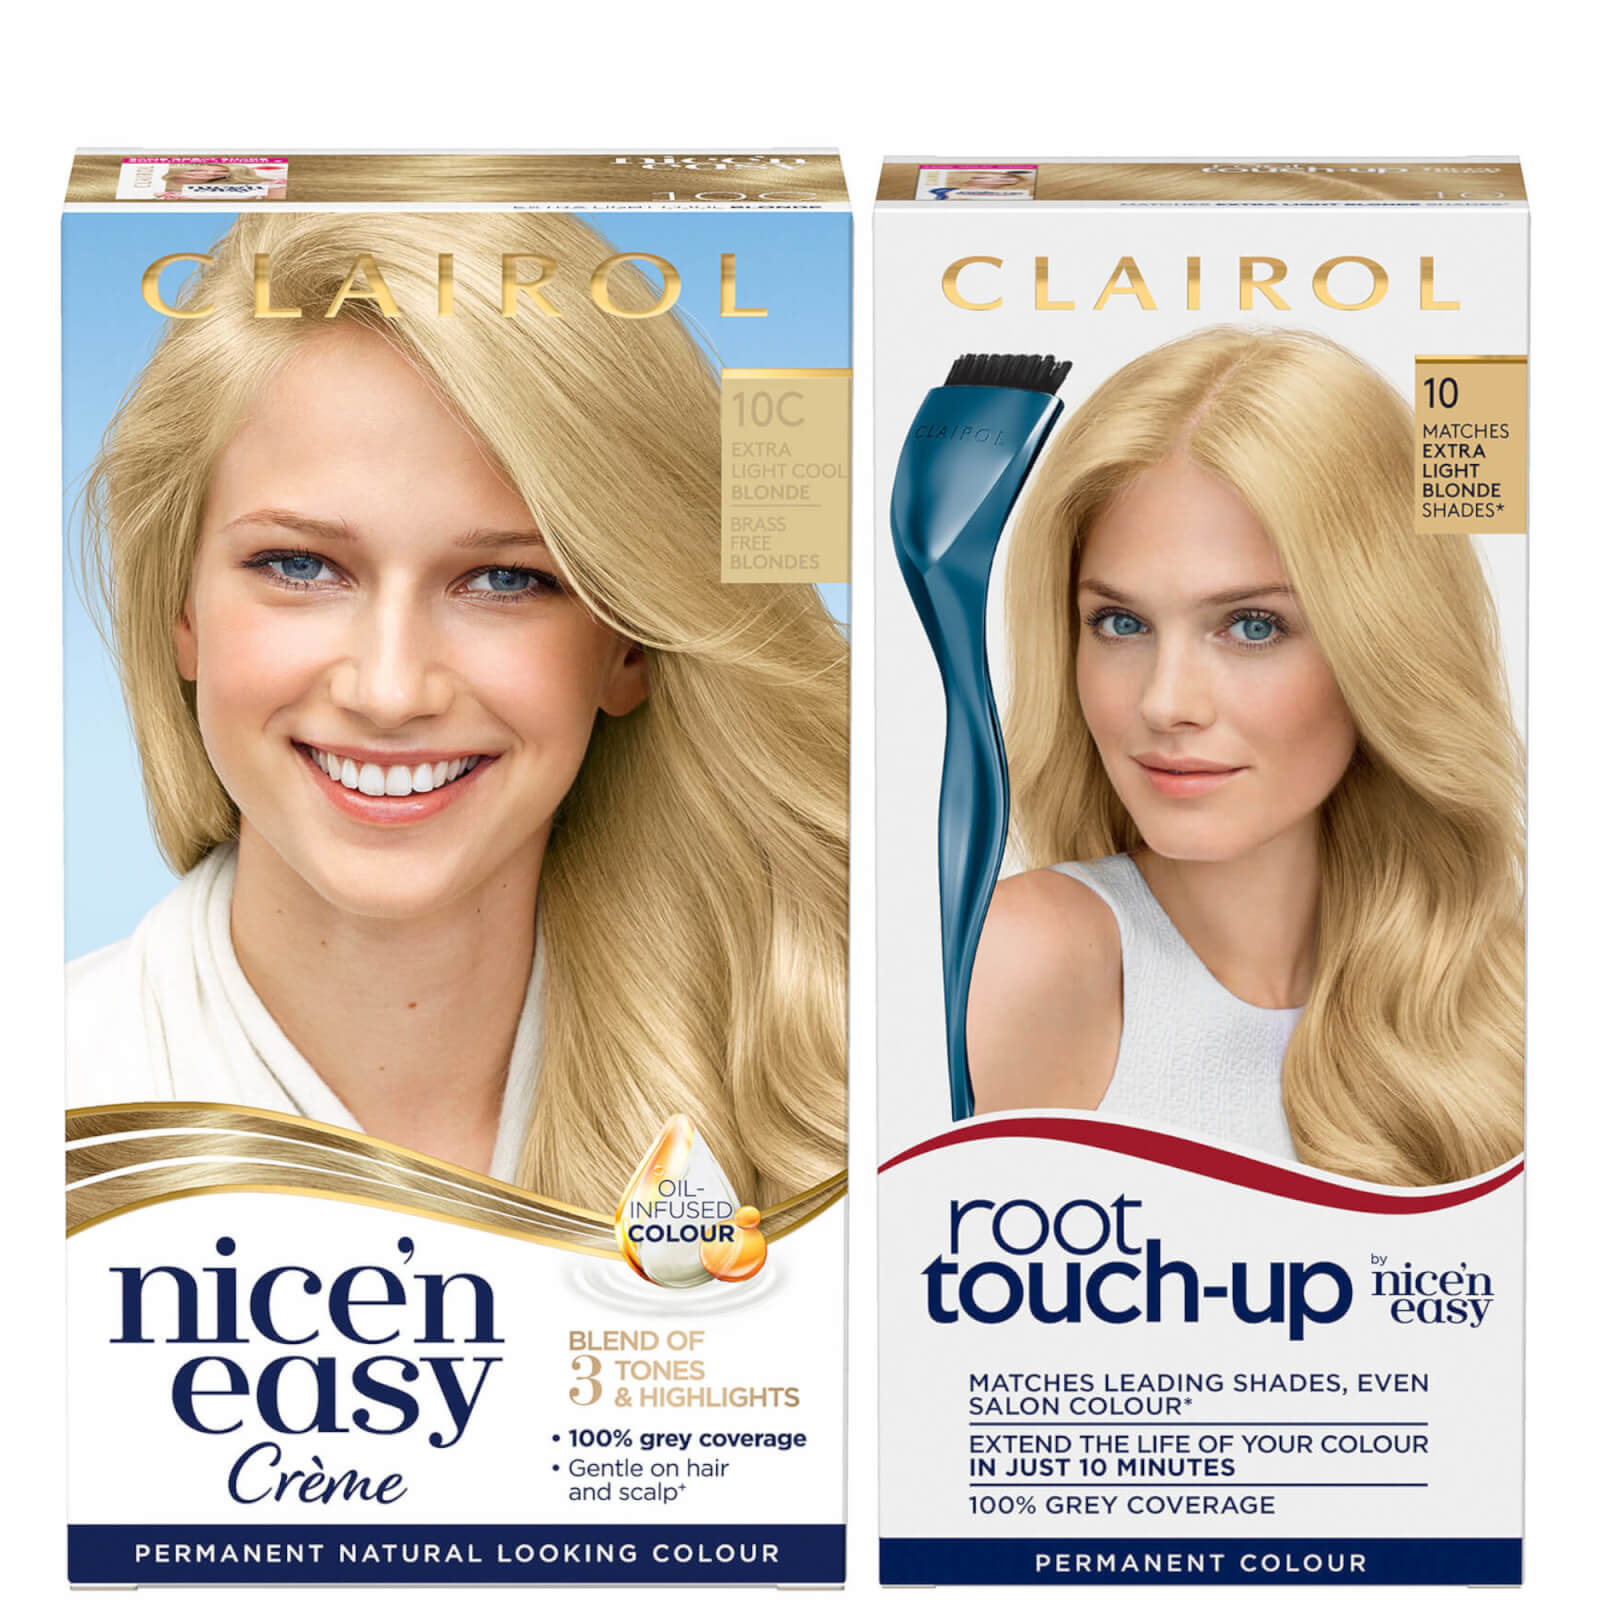 Clairol Root Touch-Up 10 Extra Light Blonde x Nice'n Easy Permanent 10C Extra Light Cool Blonde Bundle